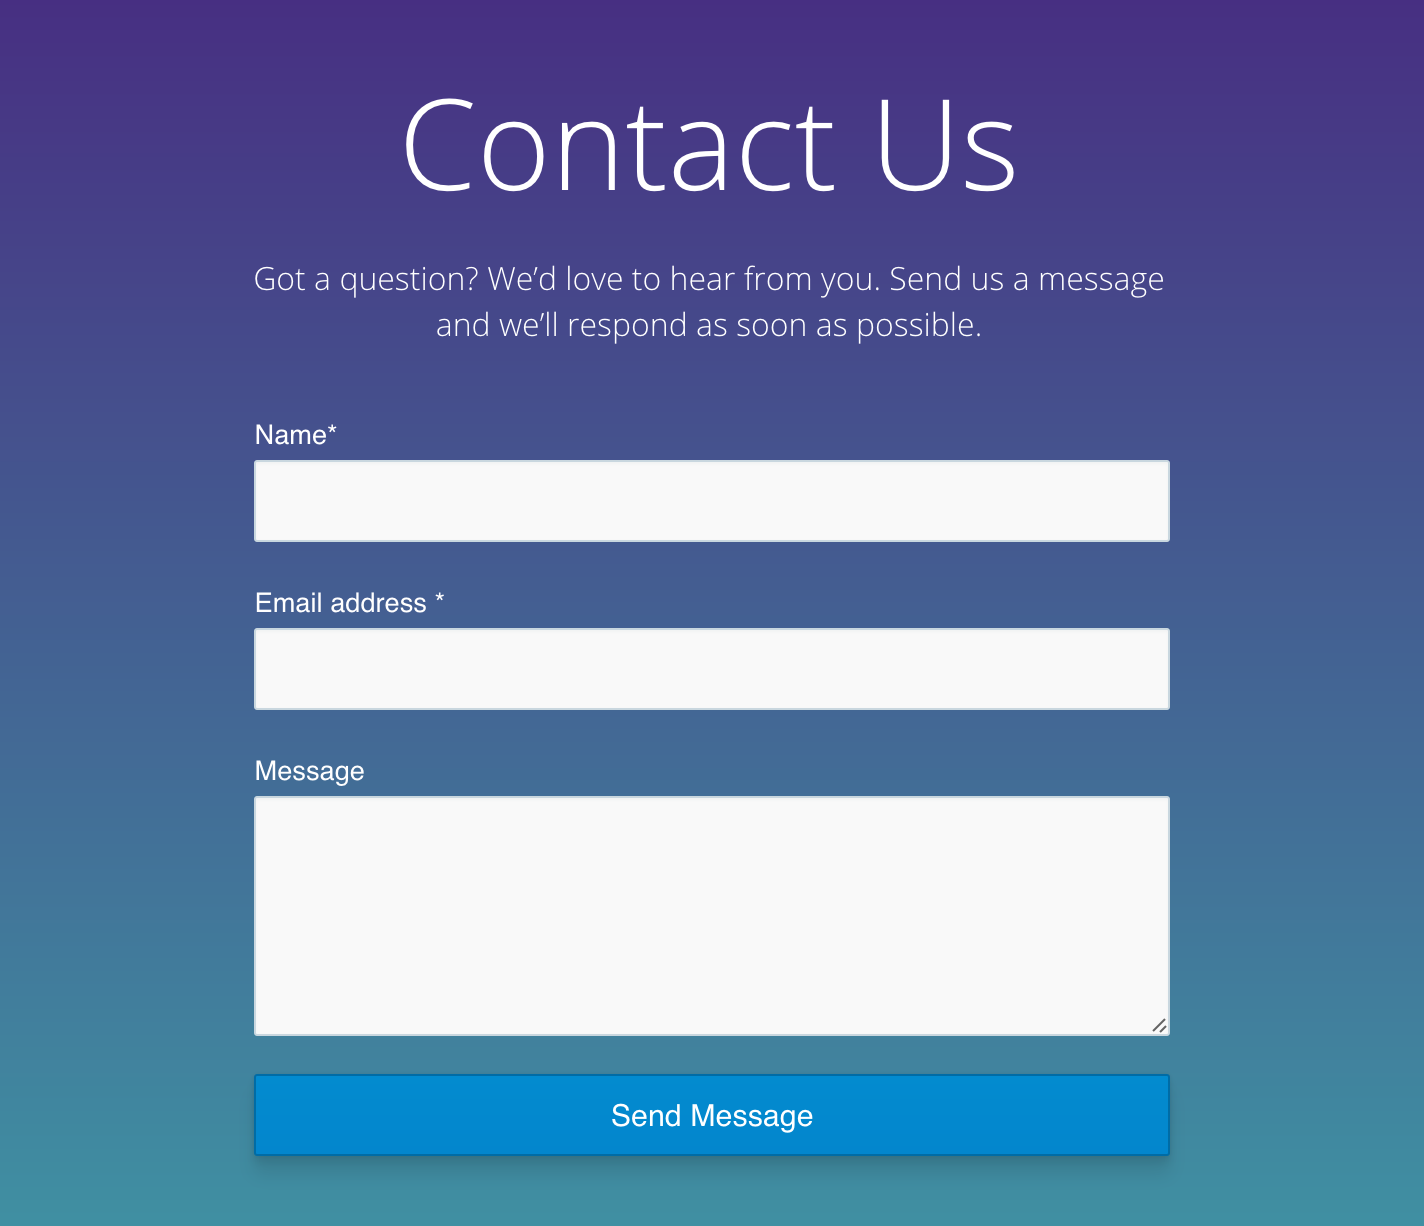 responsive-contact-us-form-using-html-css-code4education